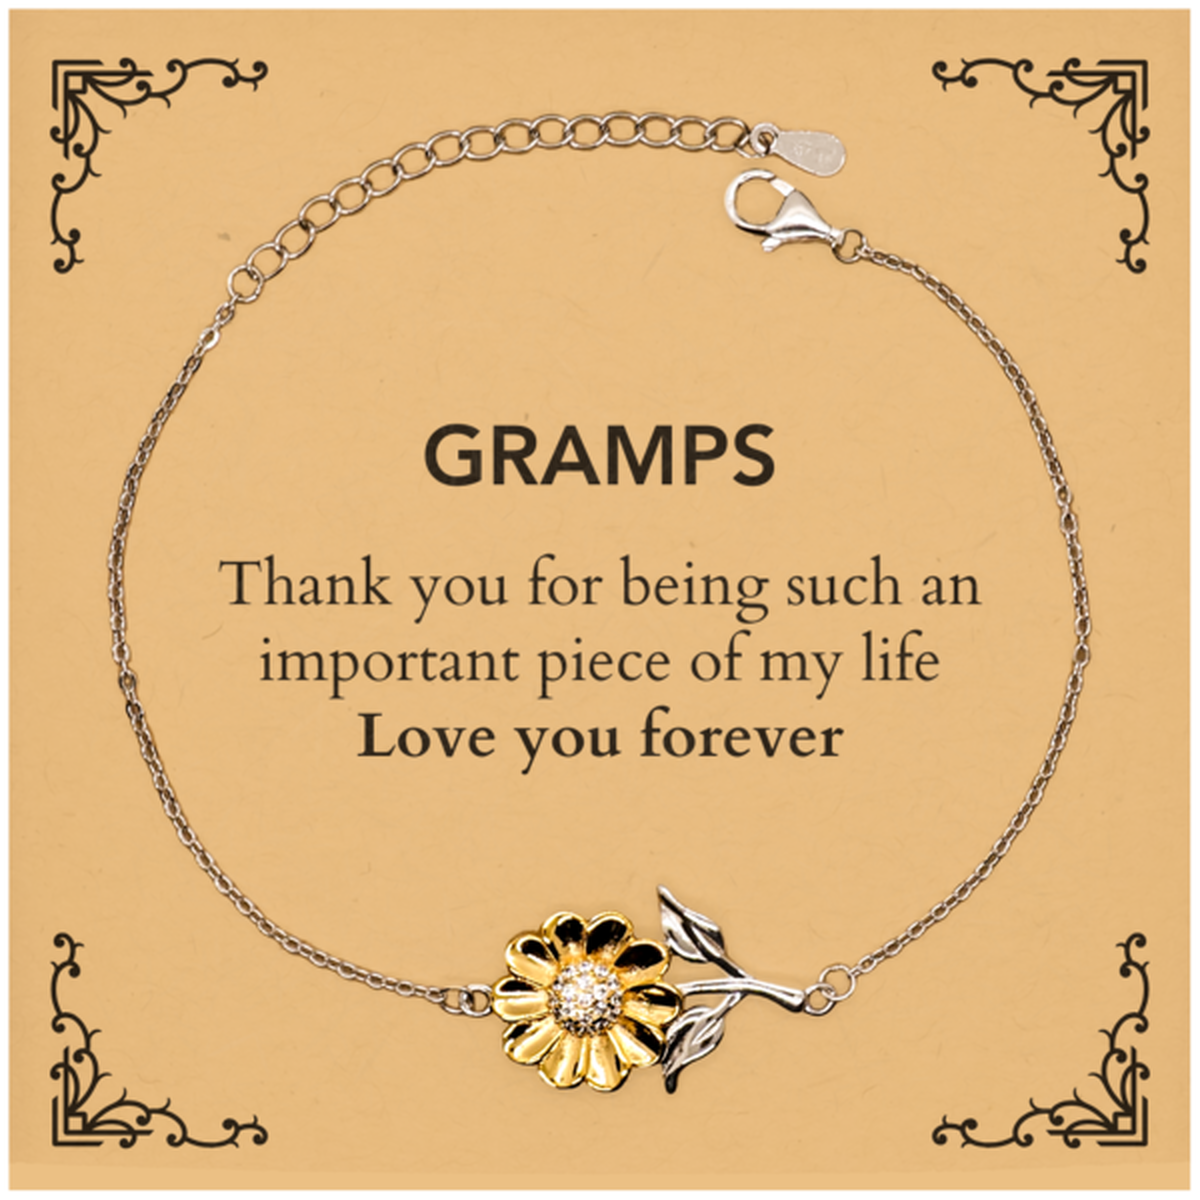 Appropriate Gramps Sunflower Bracelet Epic Birthday Gifts for Gramps Thank you for being such an important piece of my life Gramps Christmas Mothers Fathers Day